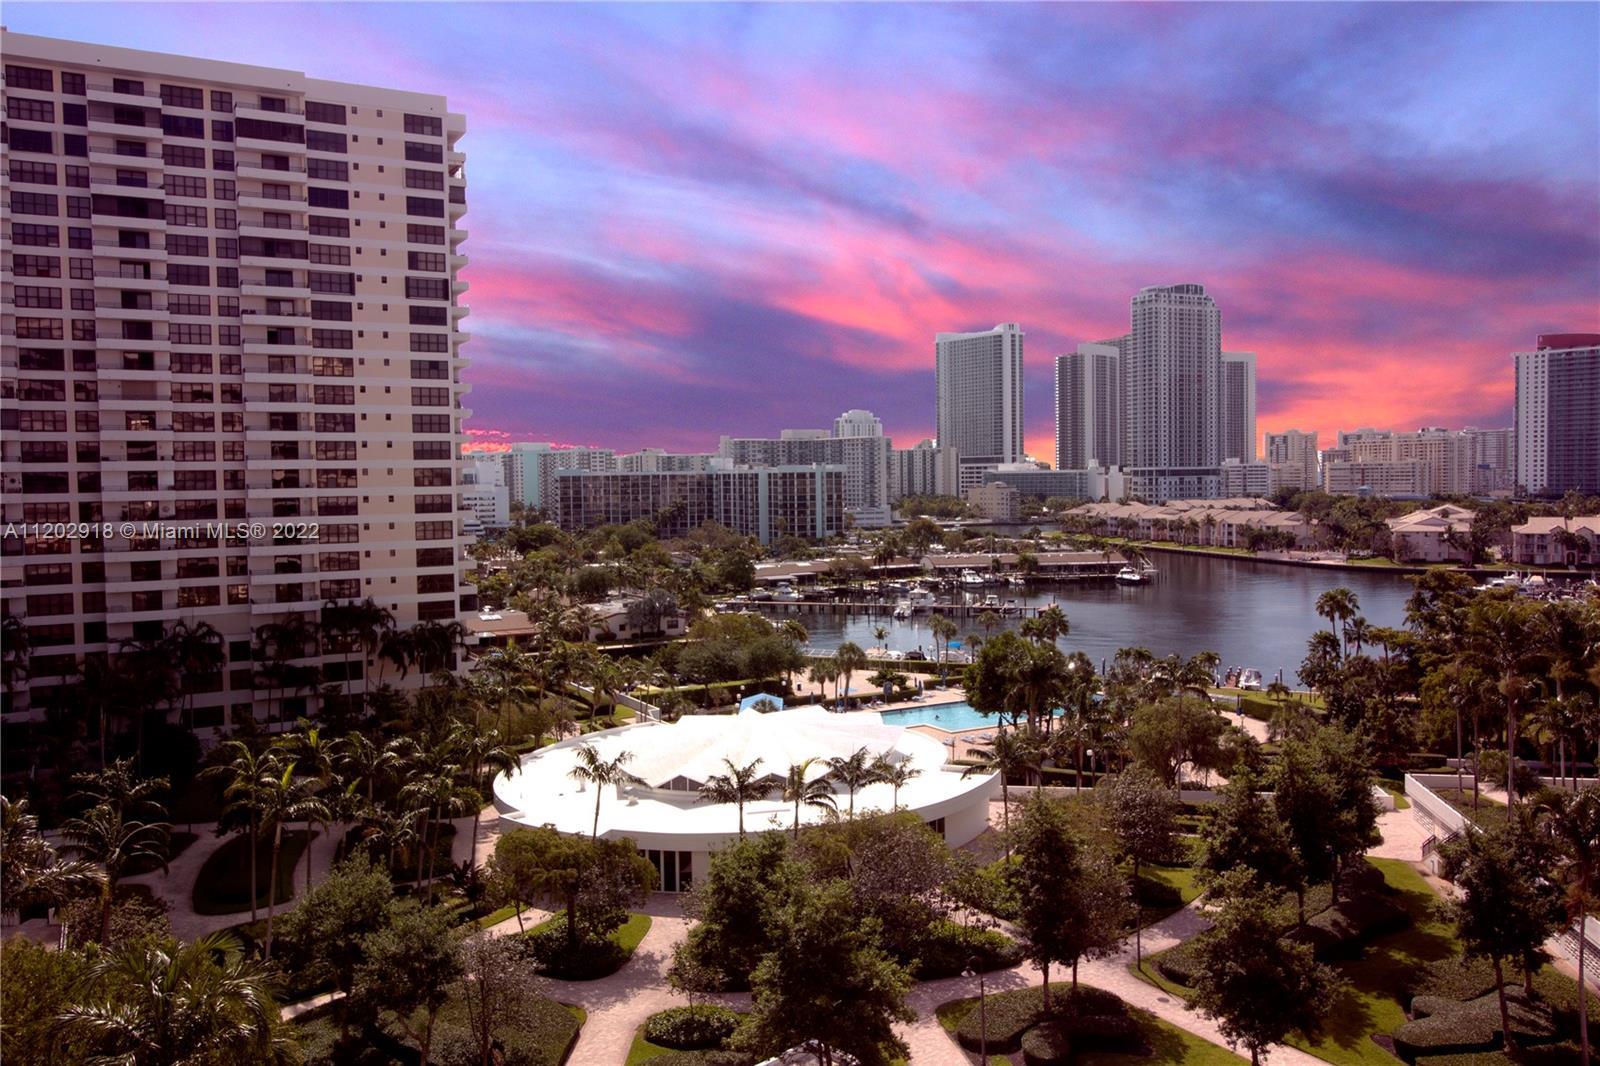 TENANT- BEAUTIFUL VIEWS! POOL GARDEN AND MARINA, WELCOME TO THE OLYMPUS! BEST LOCATION ON HALLANDALE